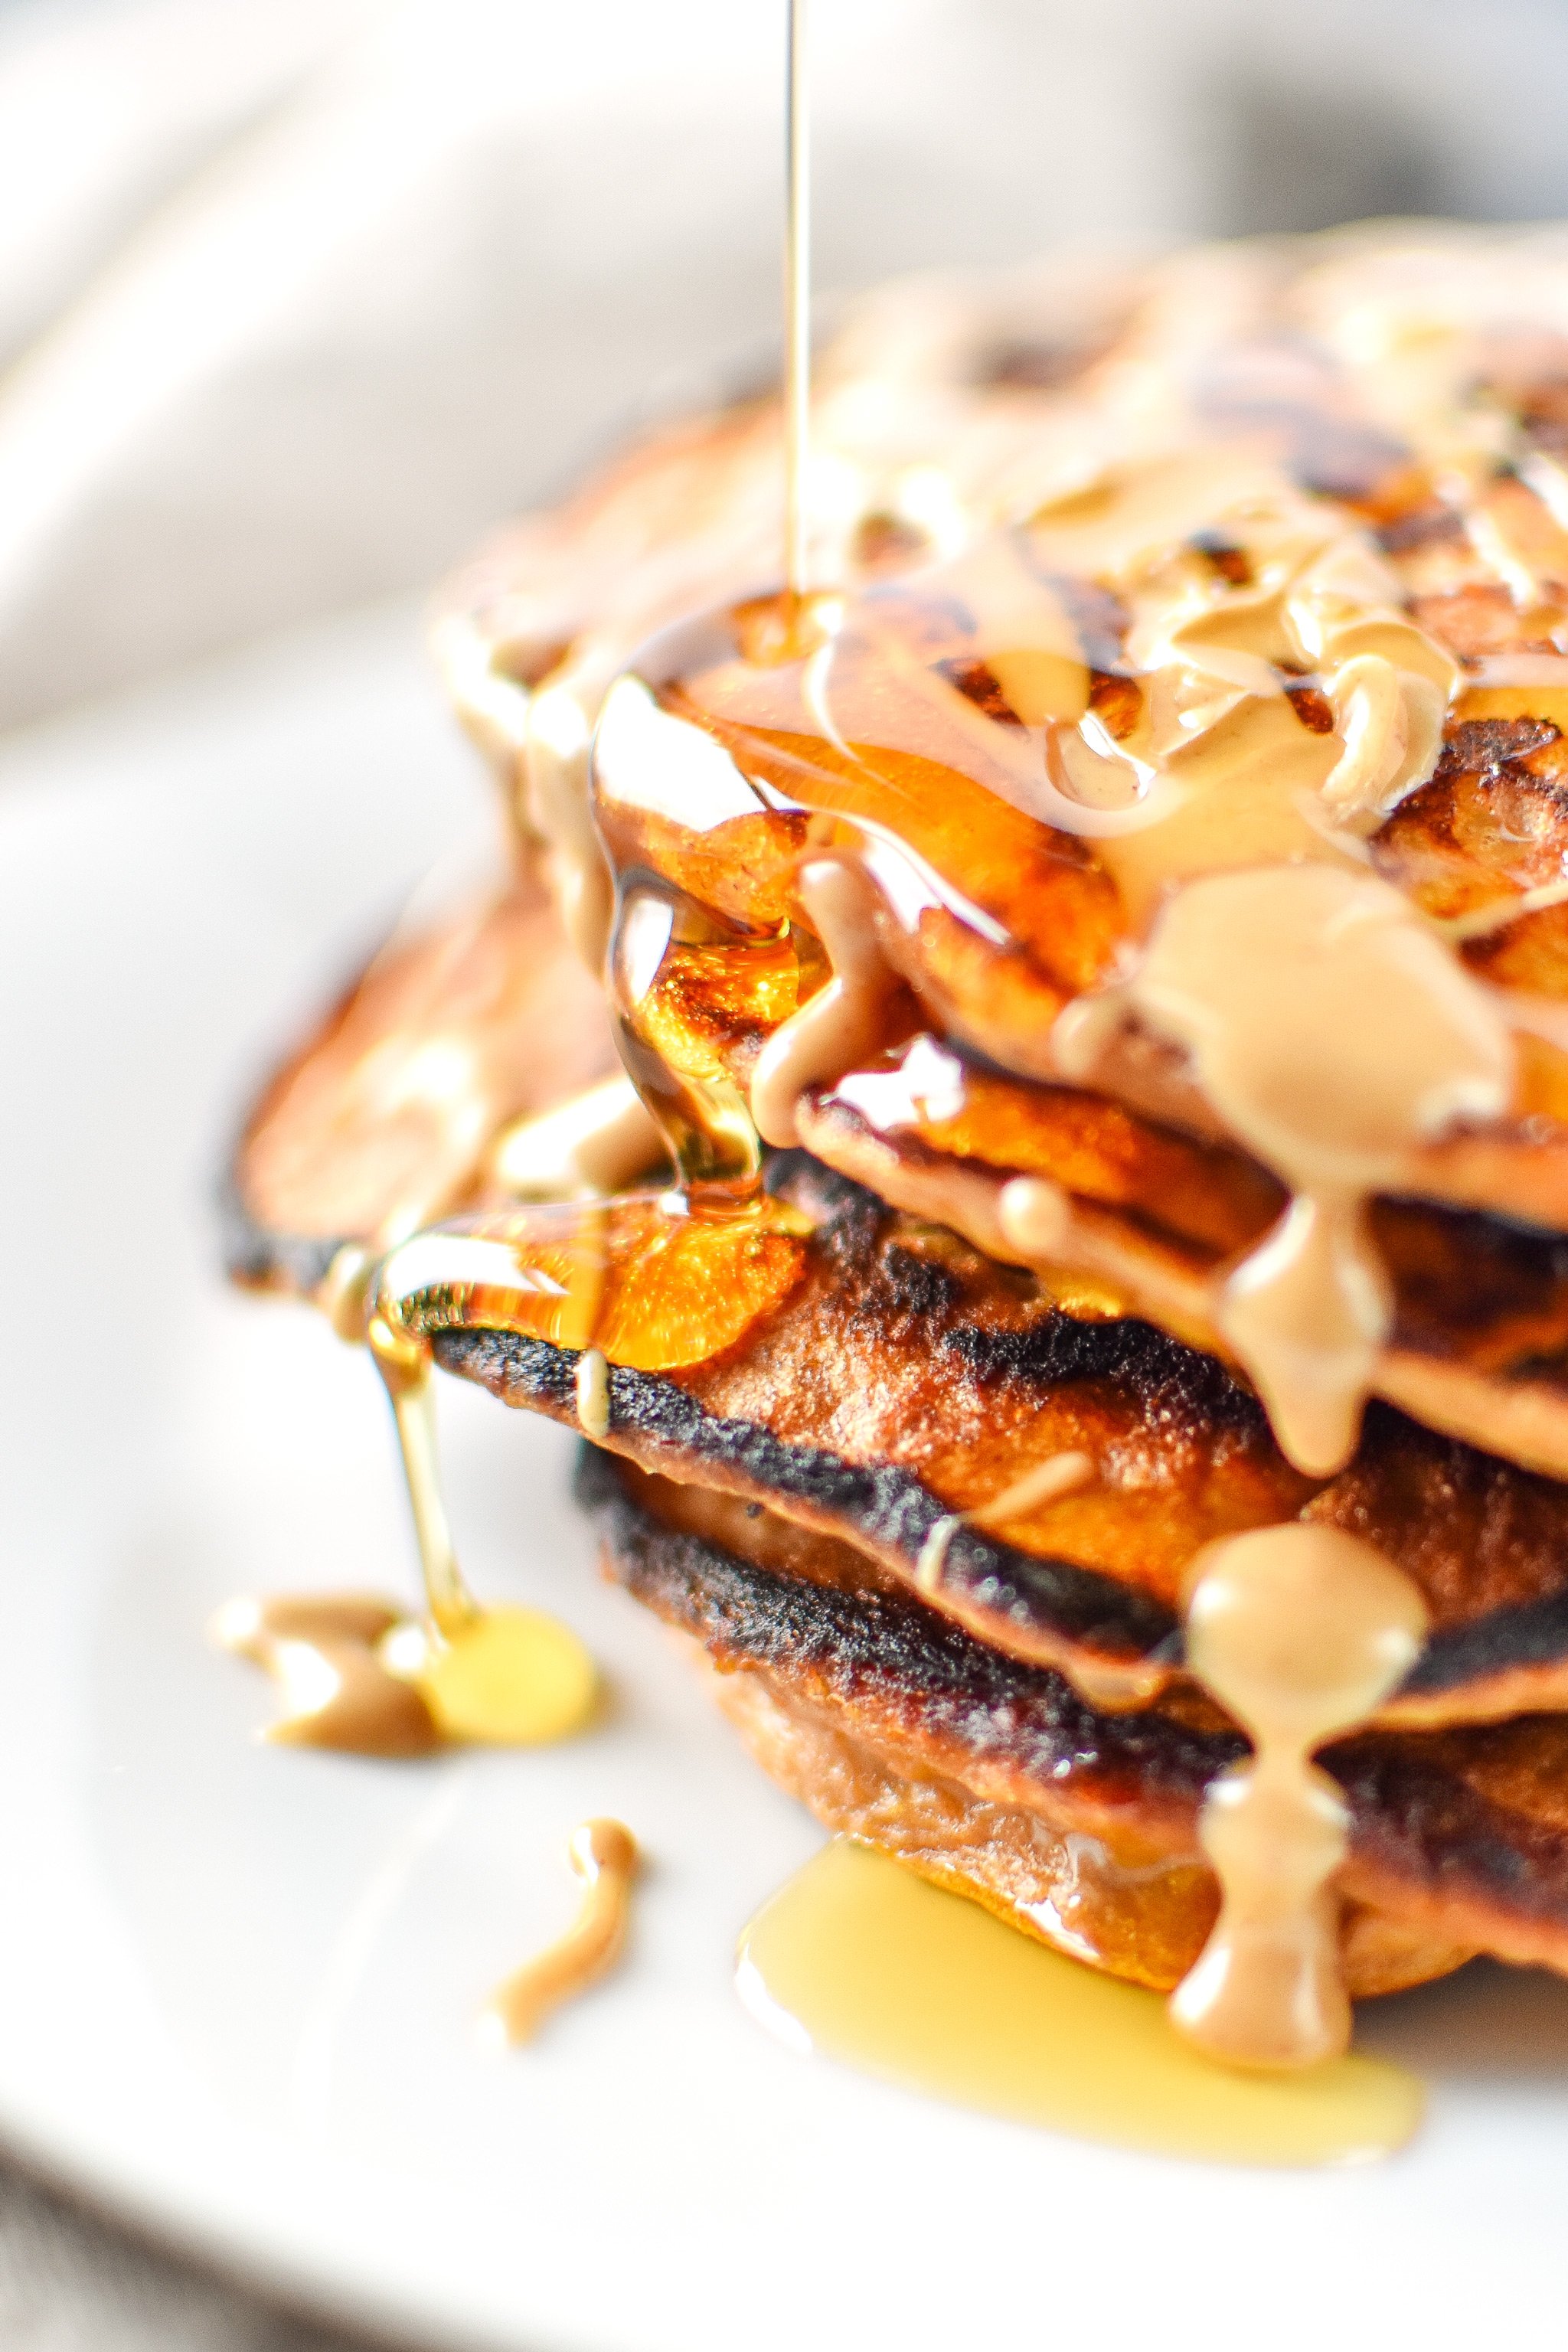 5-Ingredient Sweet Potato Banana Pancakes - Banana, sweet potato, nut butter, eggs and cinnamon are all you need to make these simple pancakes happen. Maple syrup drizzled on top is the best!